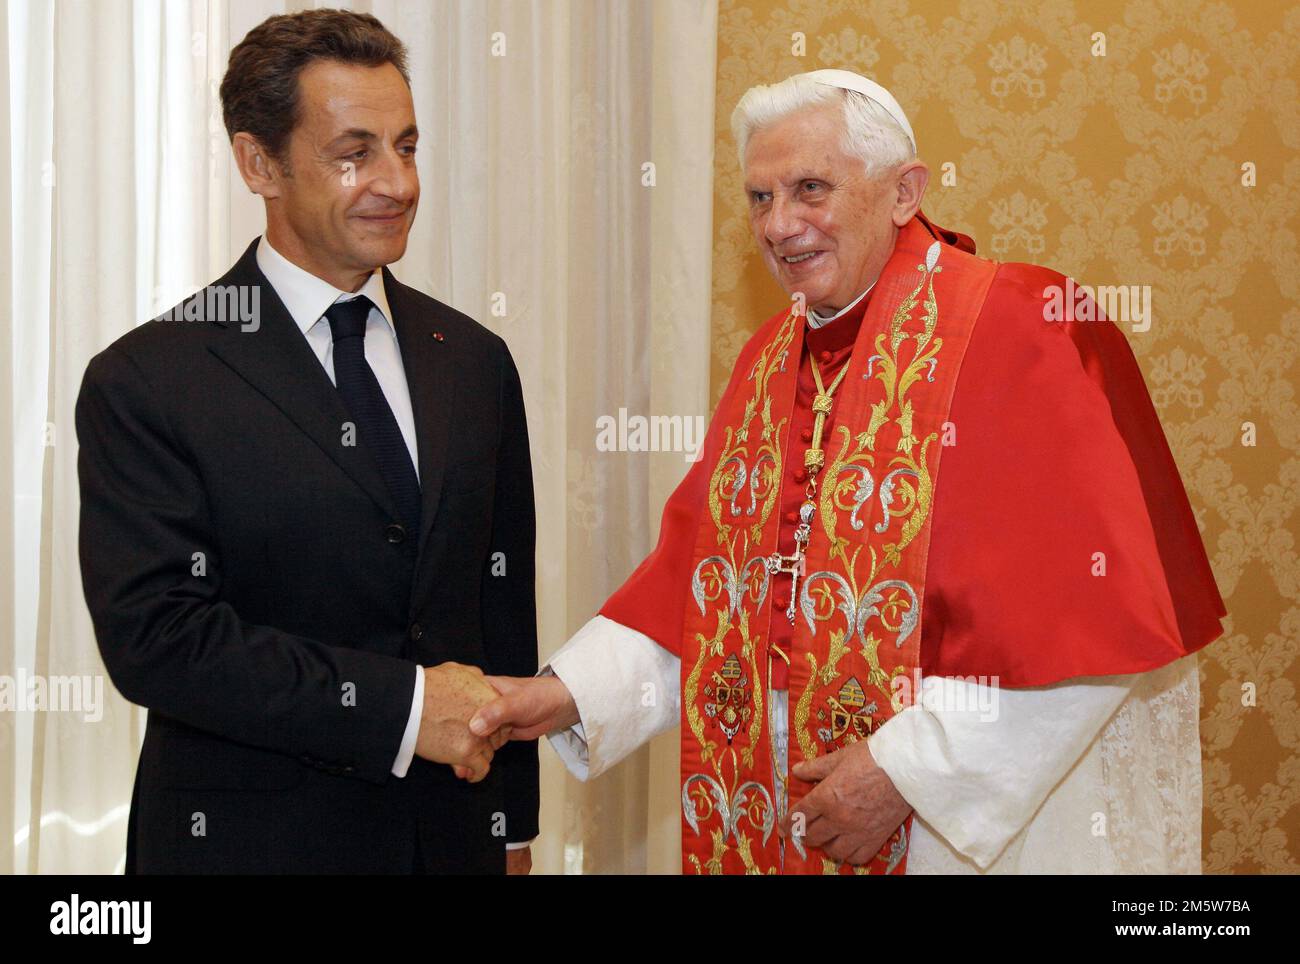 File photo - French President Nicolas Sarkozy meets Pope Benedict XVI at the Vatican city state, Italy on october 8, 2010. - Former Pope Benedict XVI has died at his Vatican residence, aged 95, almost a decade after he stood down because of ailing health. He led the Catholic Church for less than eight years until, in 2013, he became the first Pope to resign since Gregory XII in 1415. Photo by ABACAPRESS.COM Stock Photo